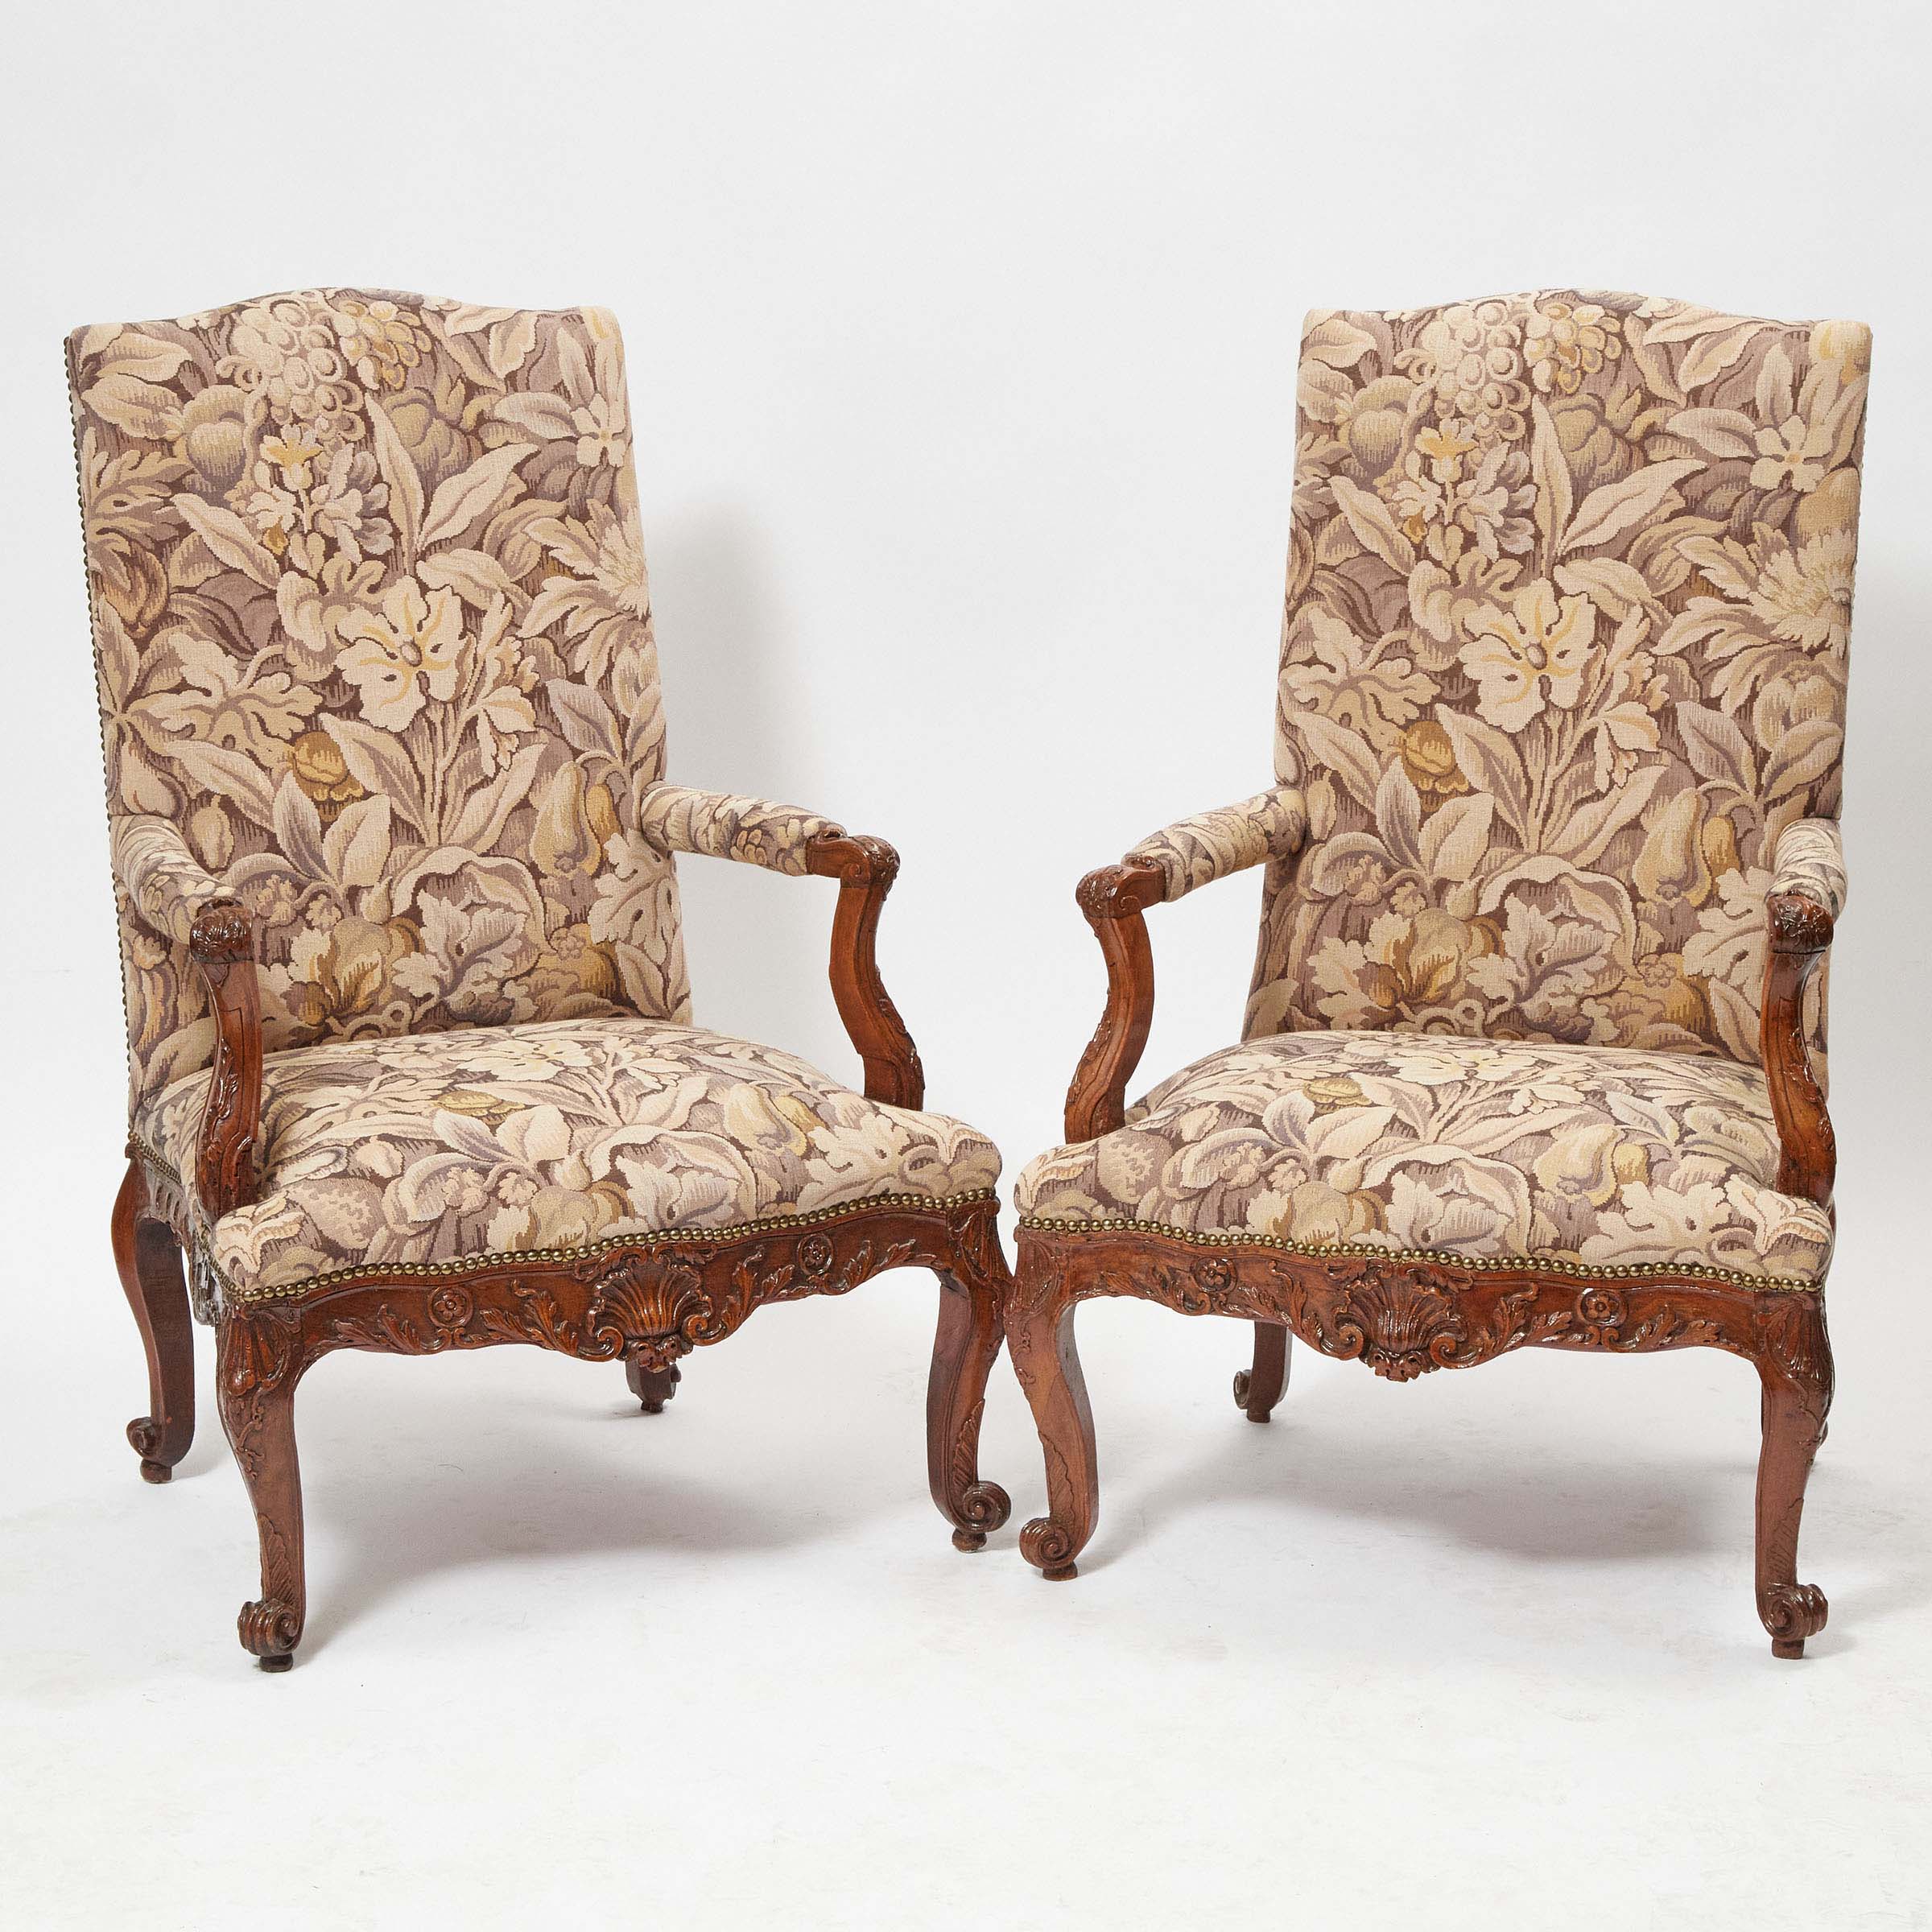 Pair of Early Louis XV Carved Walnut 2fb07f1